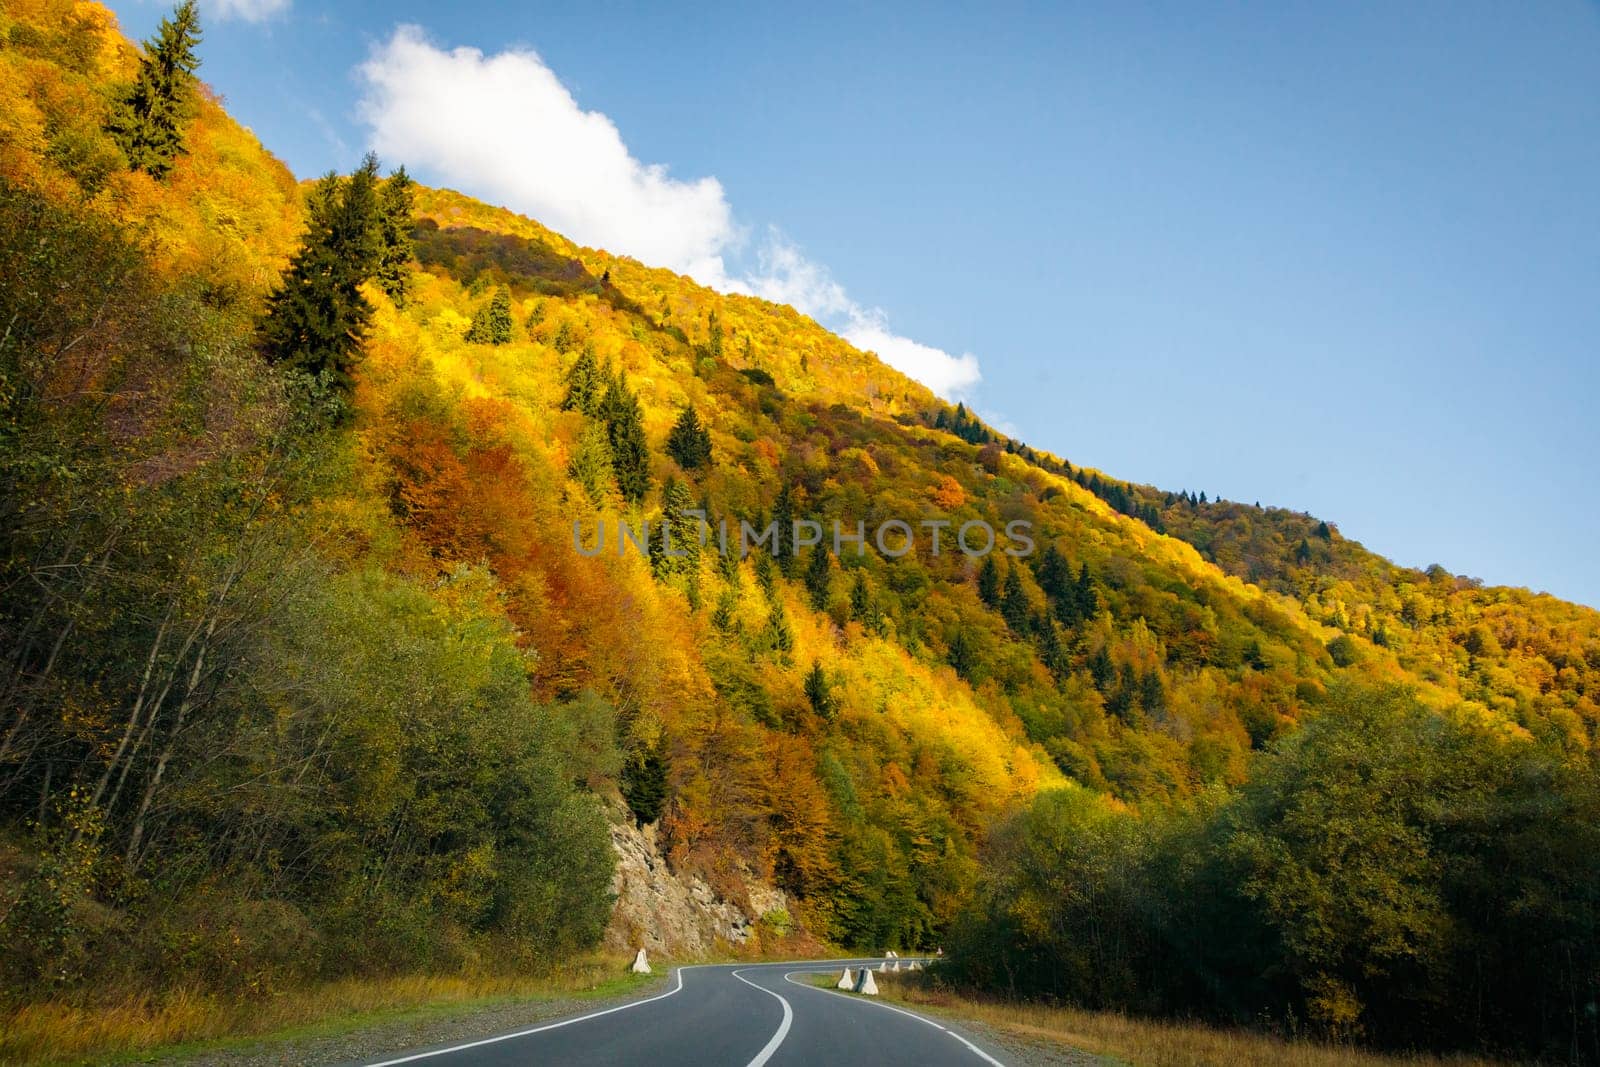 The colorful autumn mountains of Ossetia in all their glory